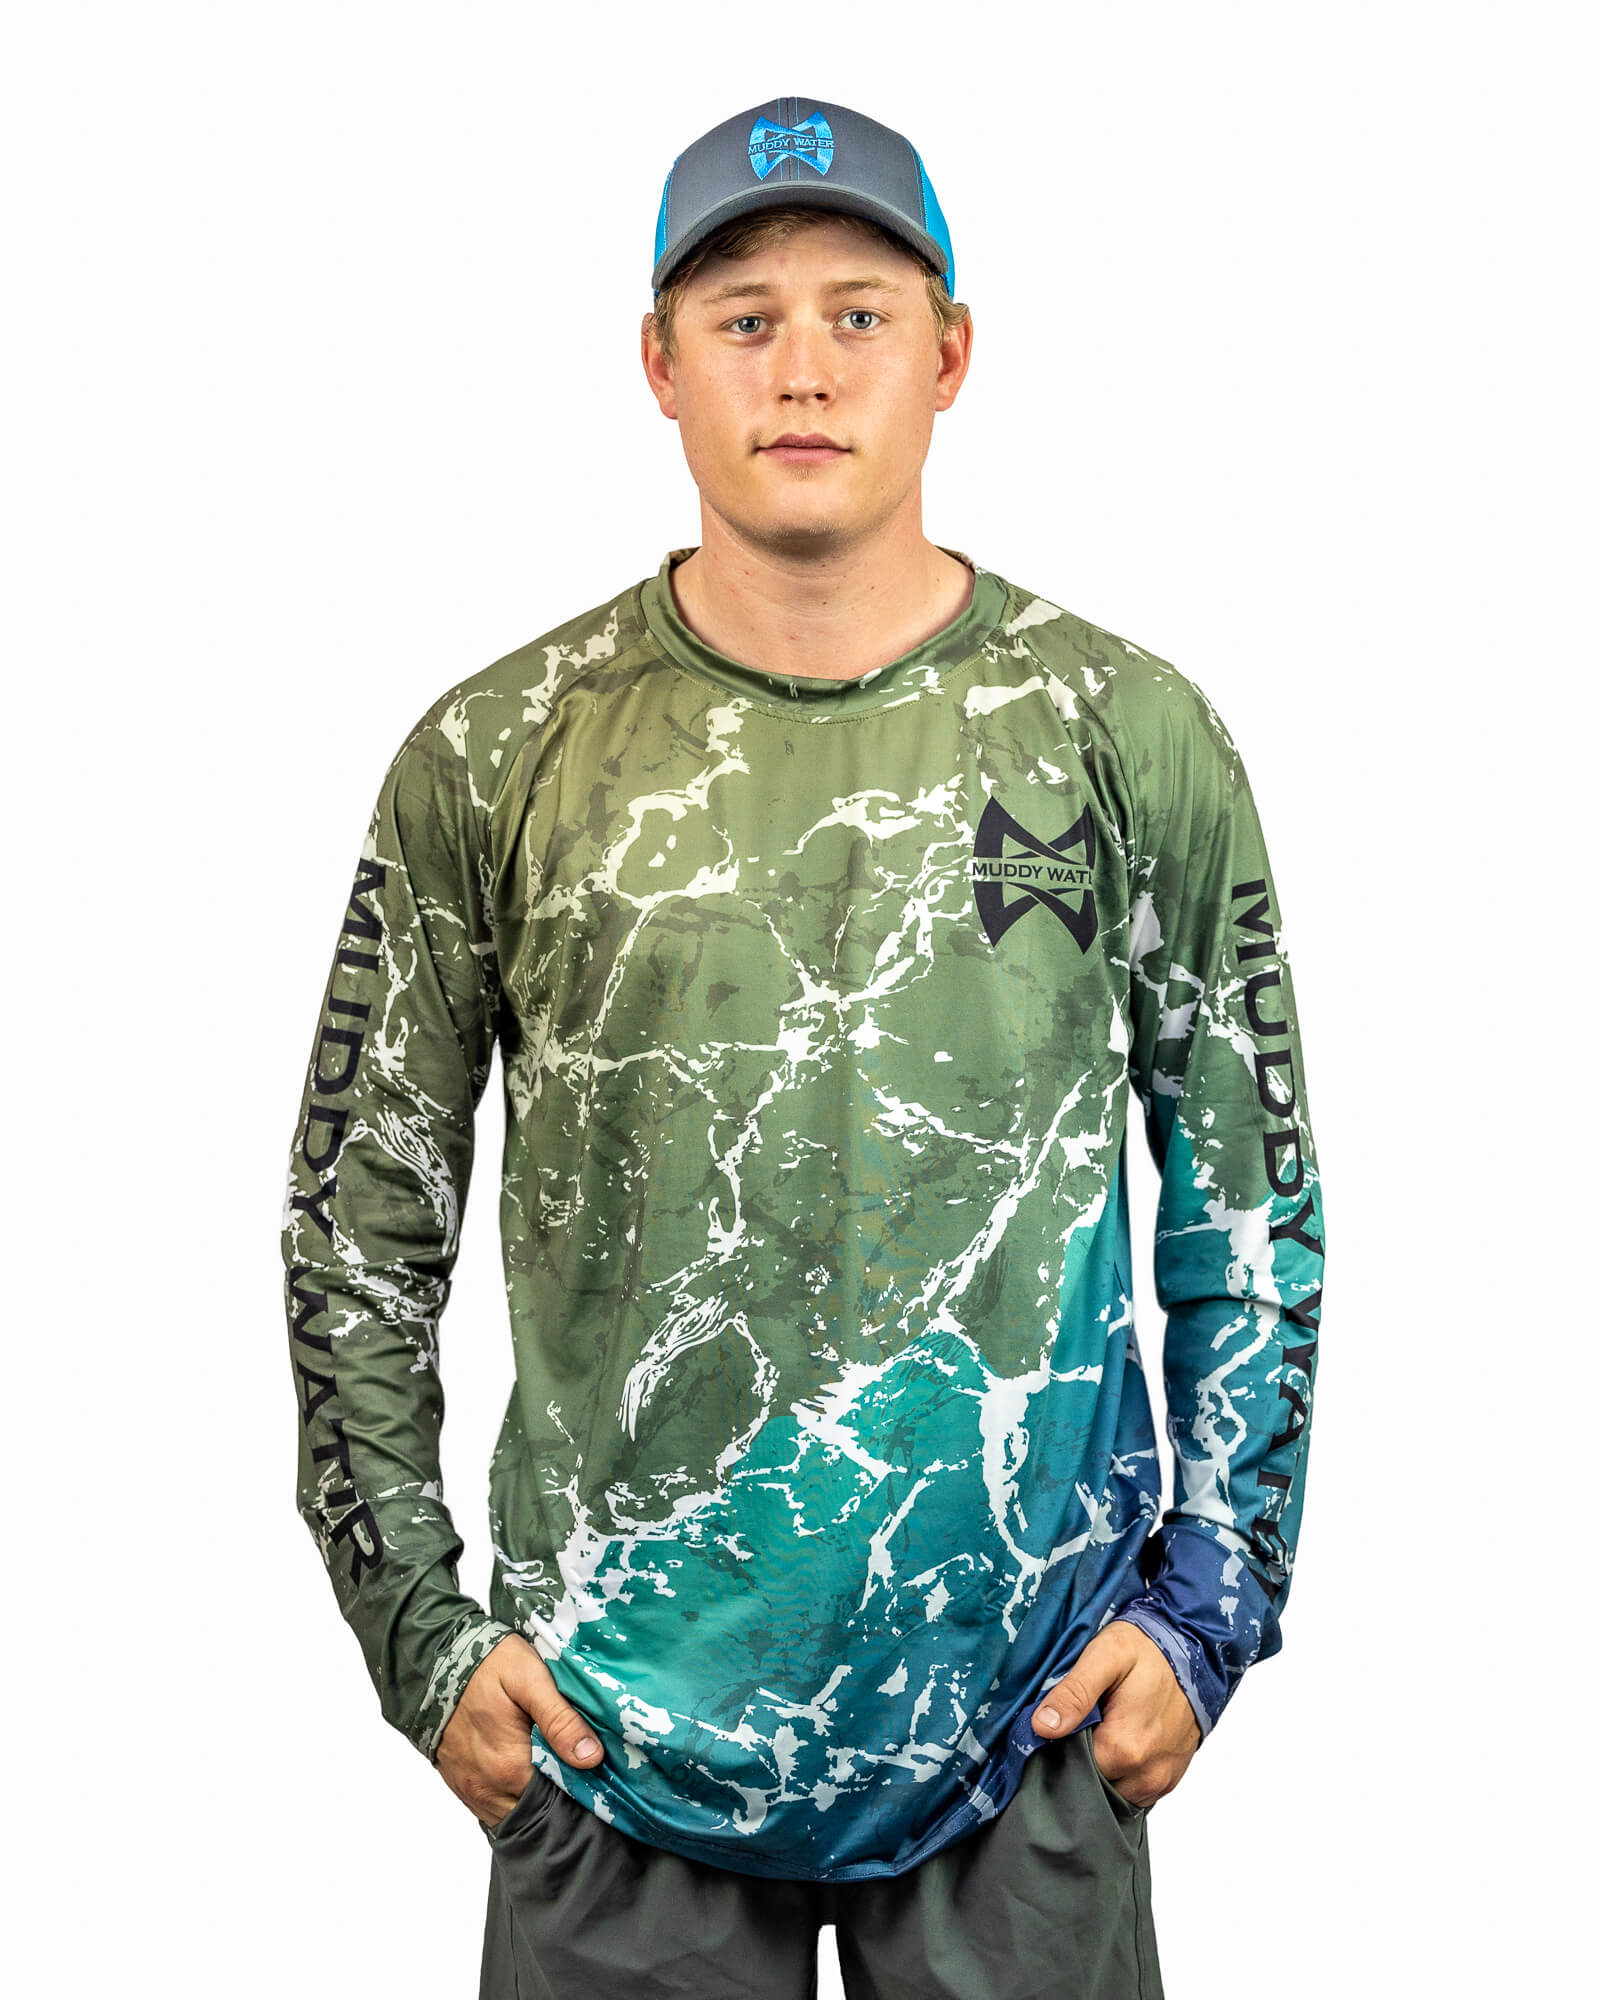 MERGE Limited Edition Fishing Shirt - Muddy Water Outdoors